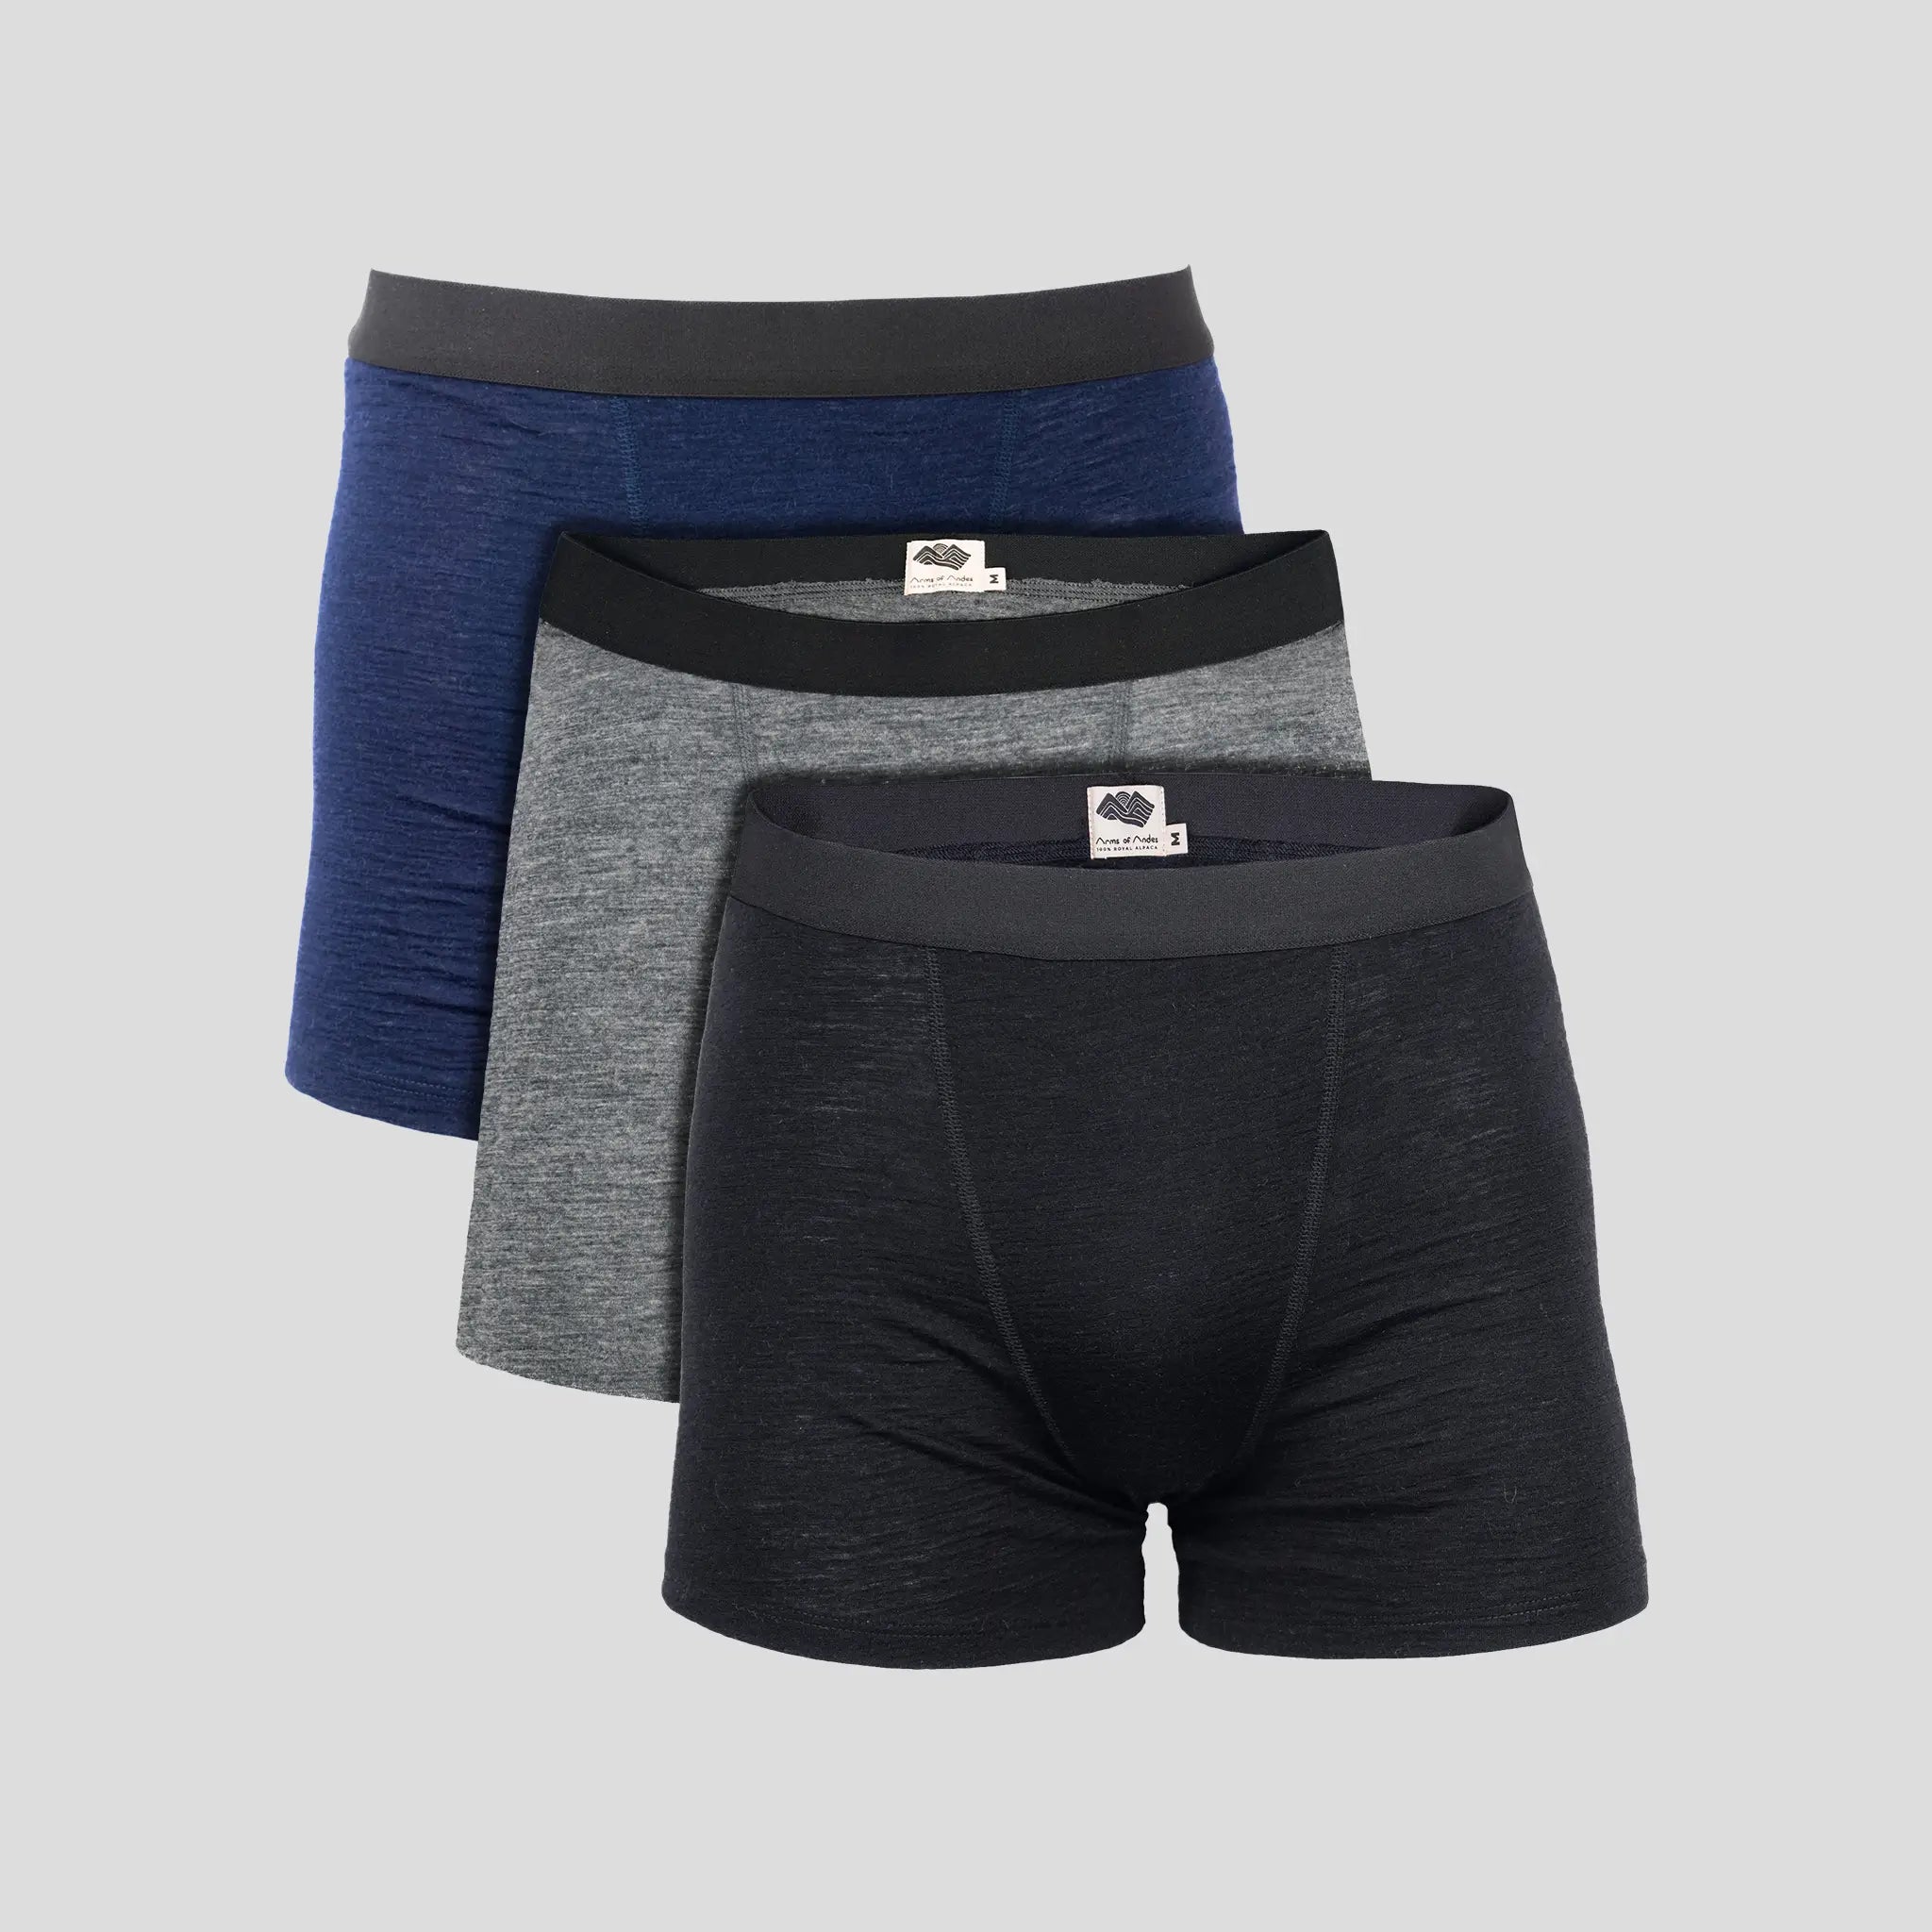 Soft boxers briefs, without itchy seams or labels.From organic